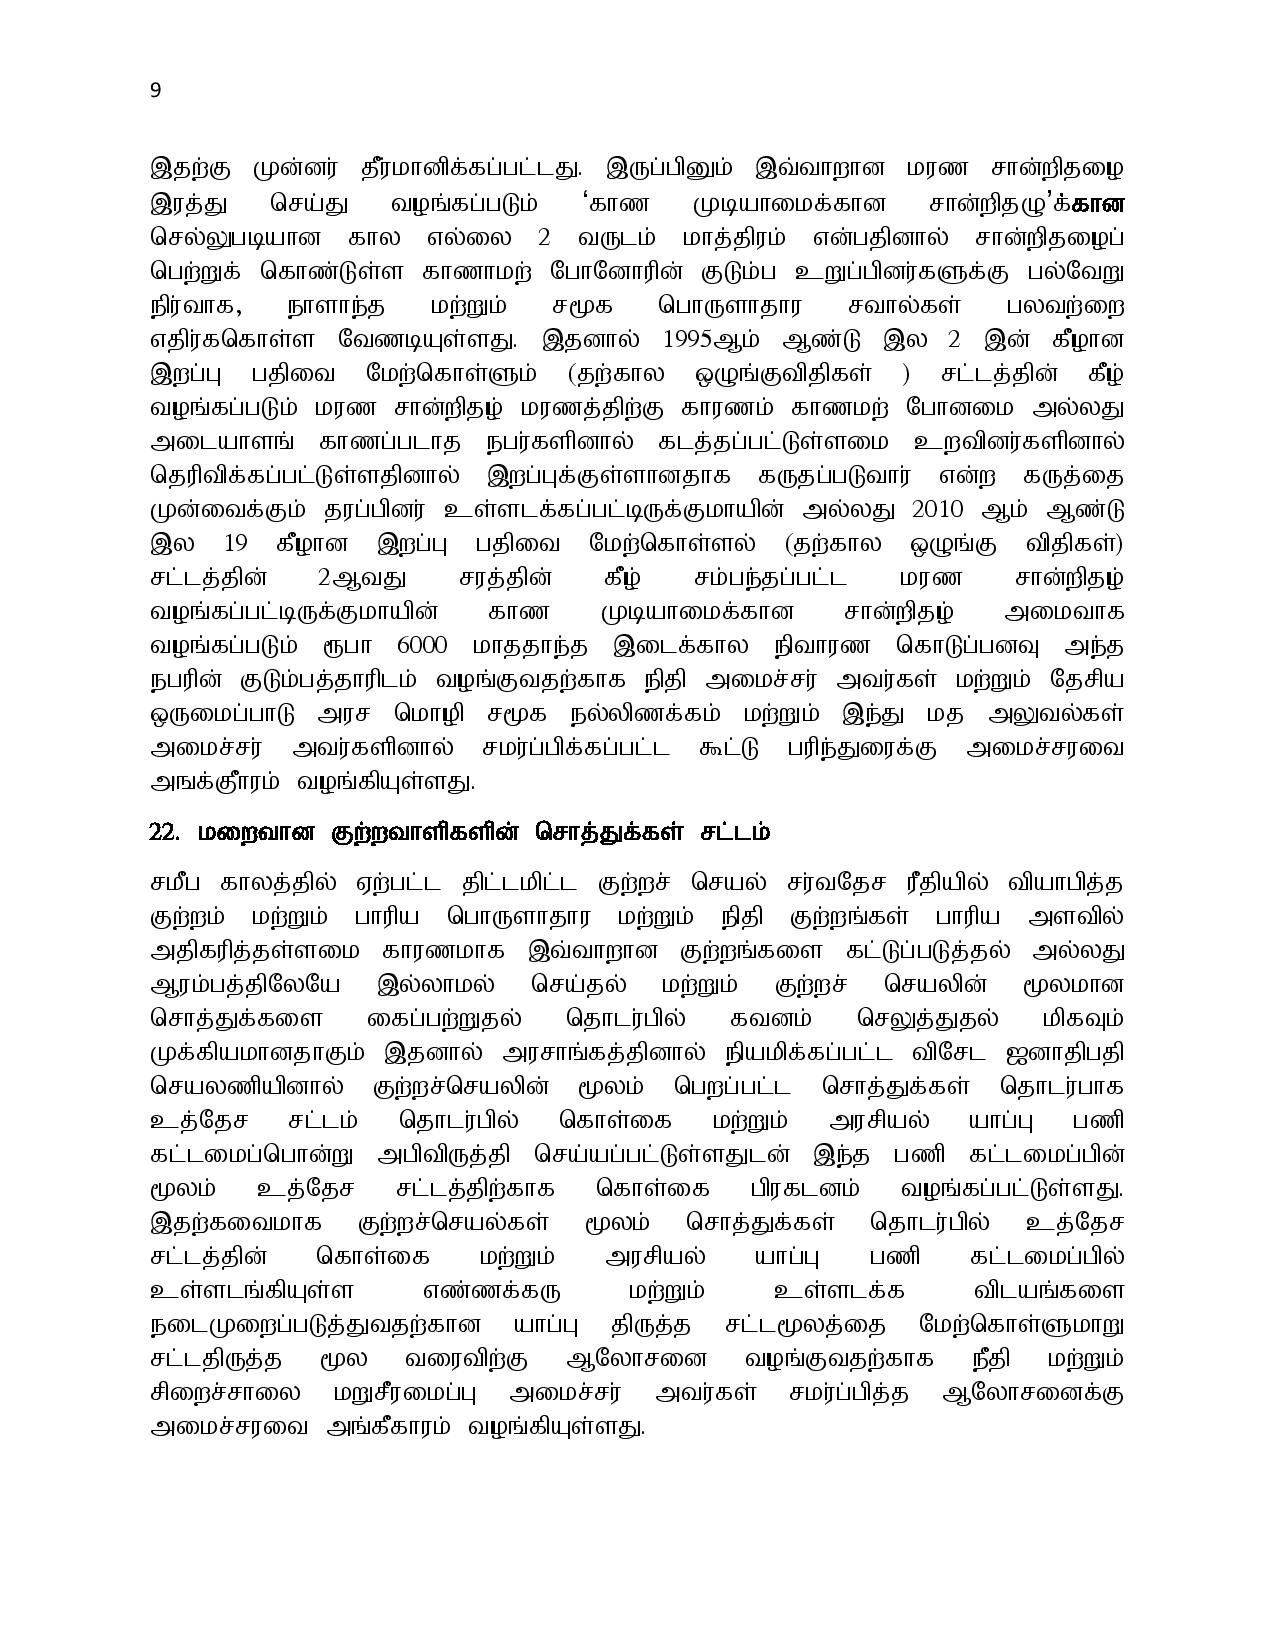 29.10.2019 cabinet tamil page 009